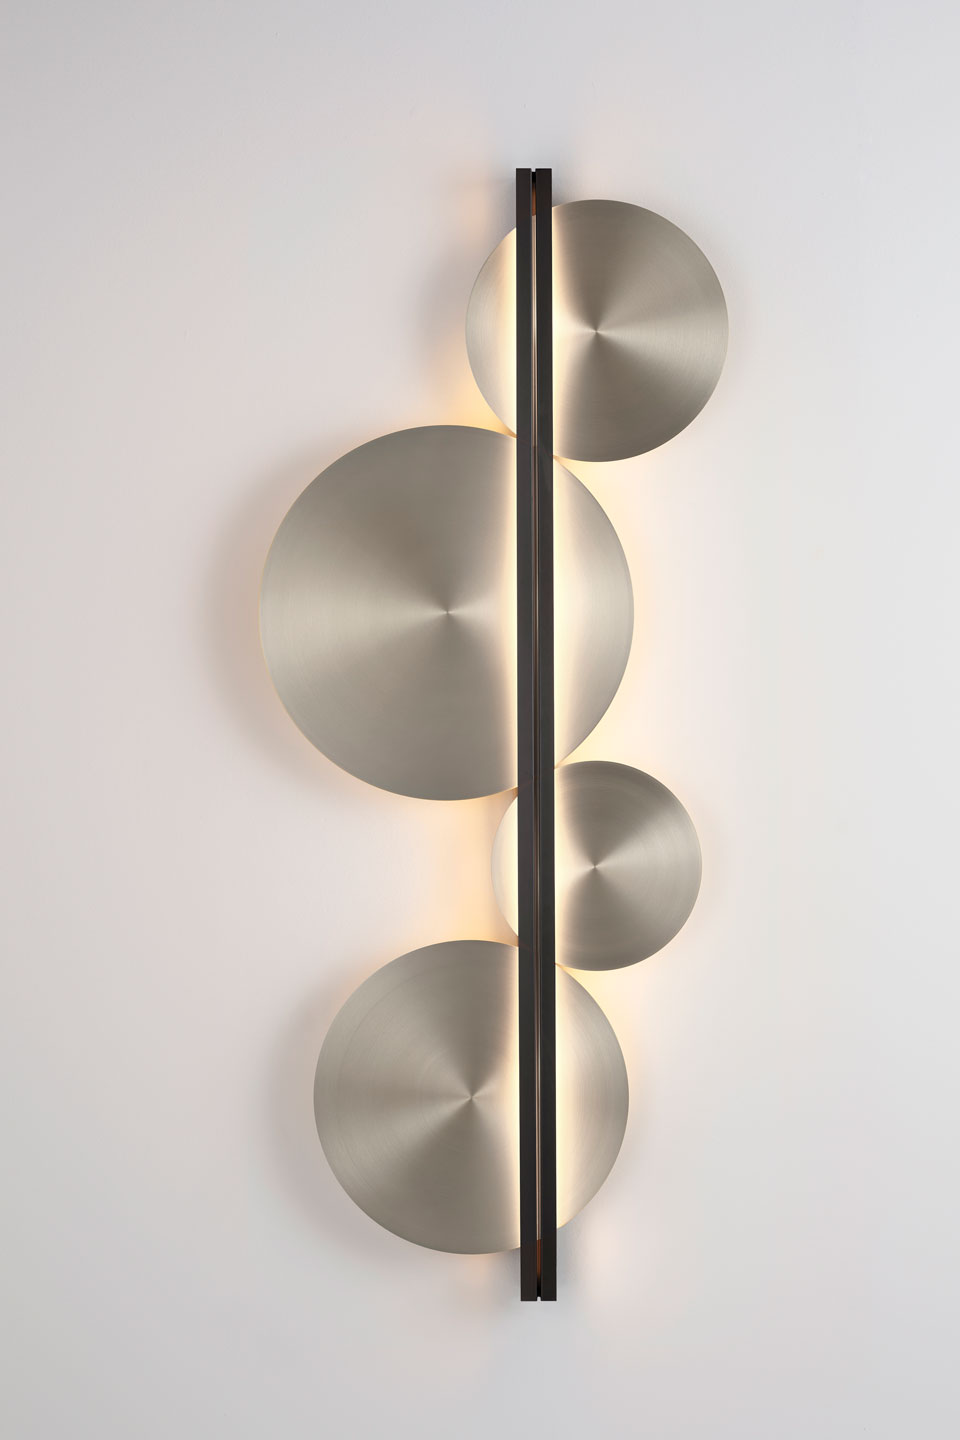 Strate Moon wall lamp in black and silver . CVL Luminaires. 